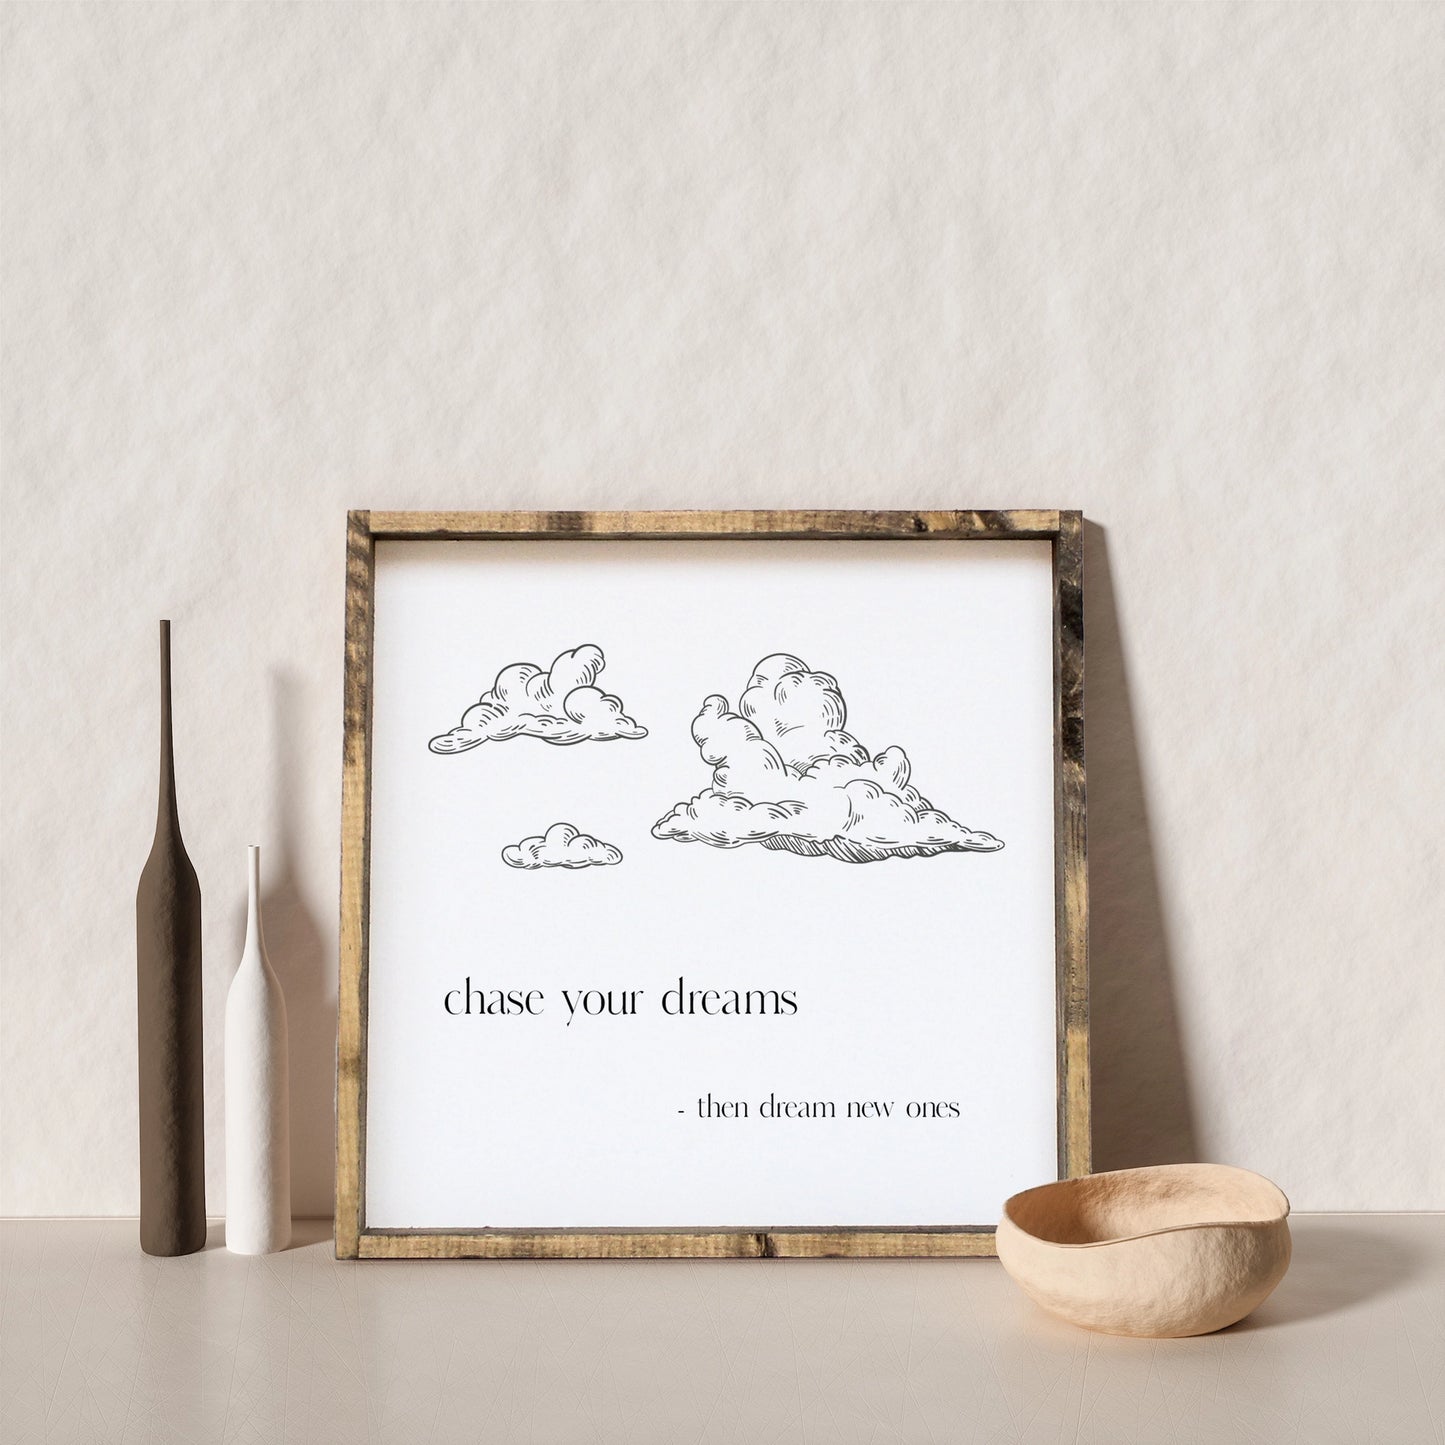 Williamraedesigns - Chase Your Dreams